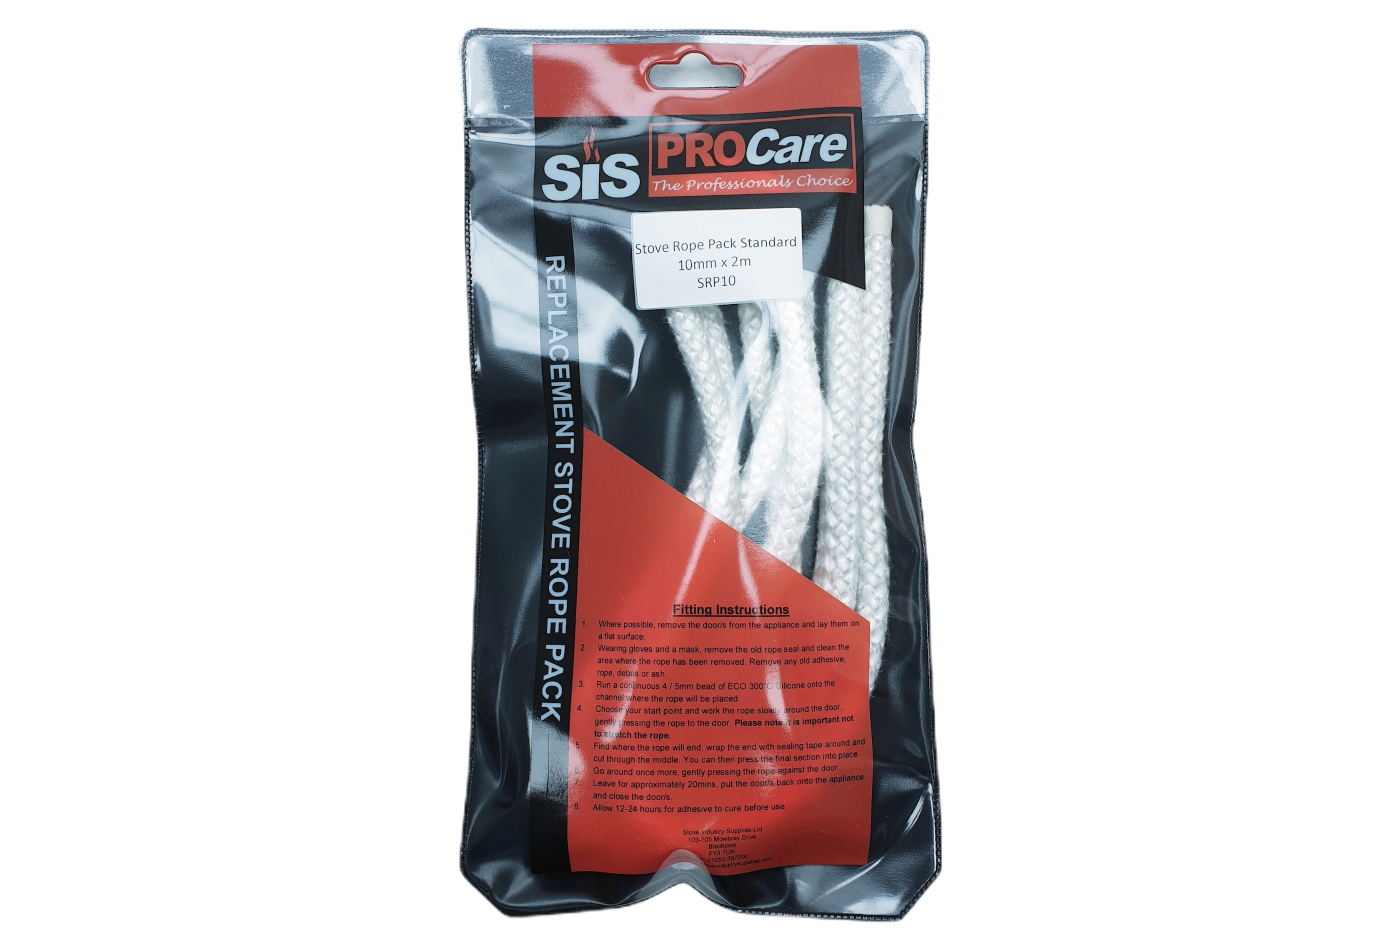 SiS Procare White 10 milimetre x 2 metre Standard Stove Rope Pack - product code SRP10